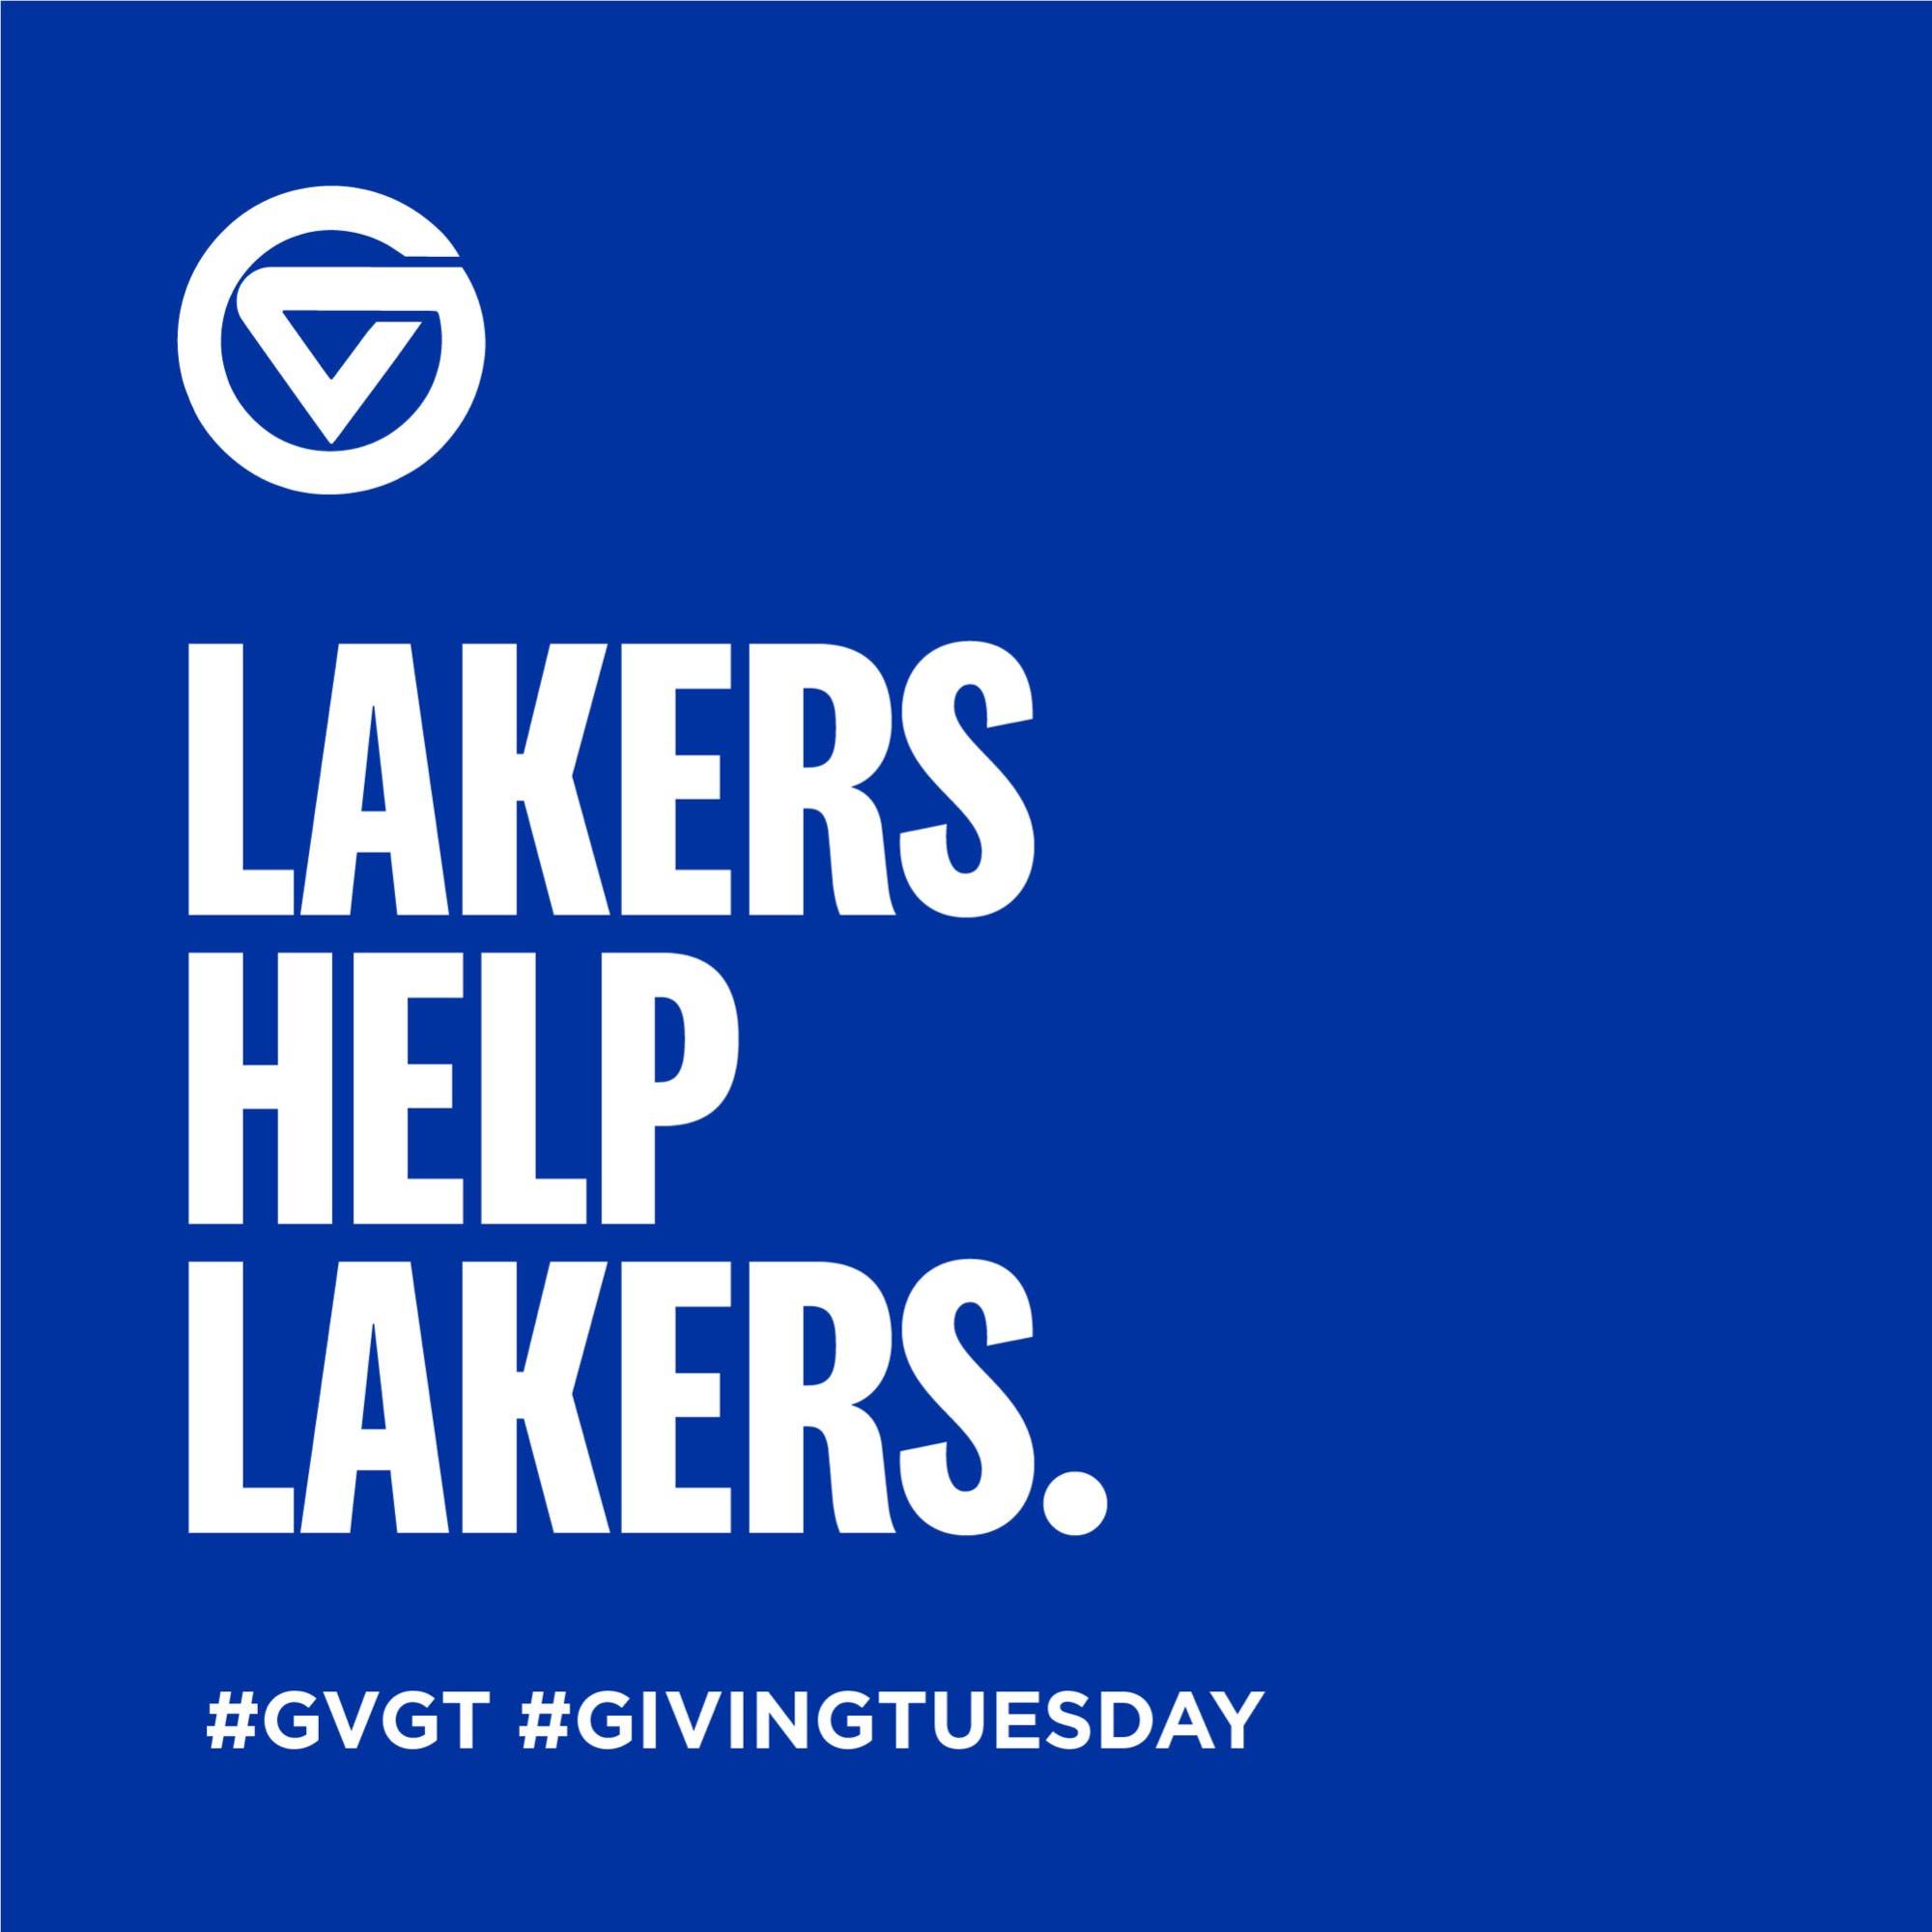 Giving Tuesday - Lakers Helping Lakers